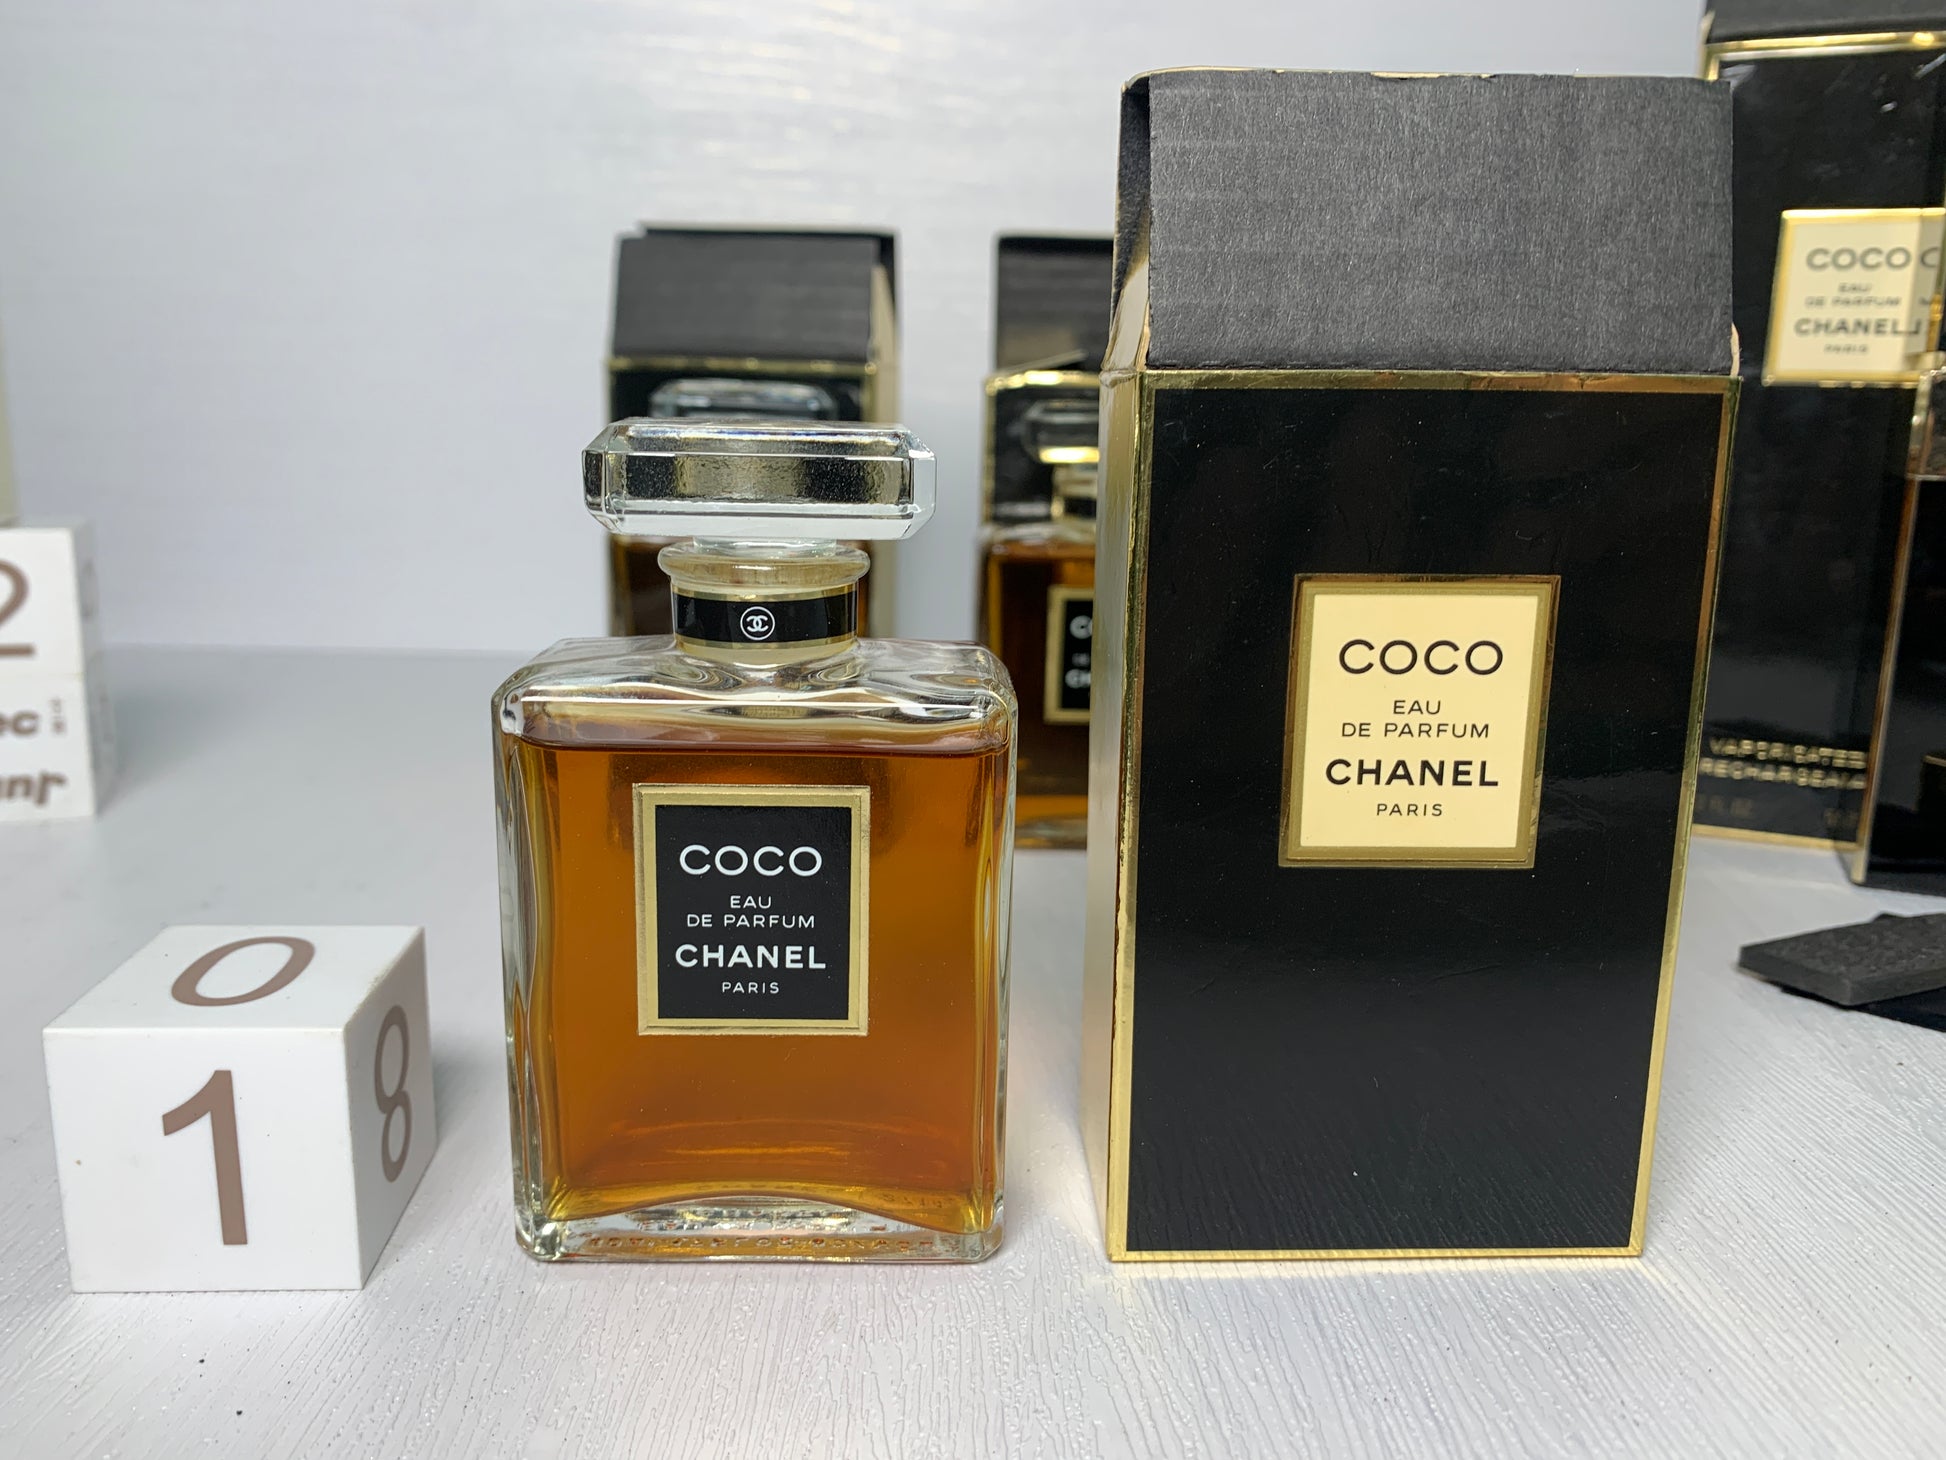 coco chanel cologne for women